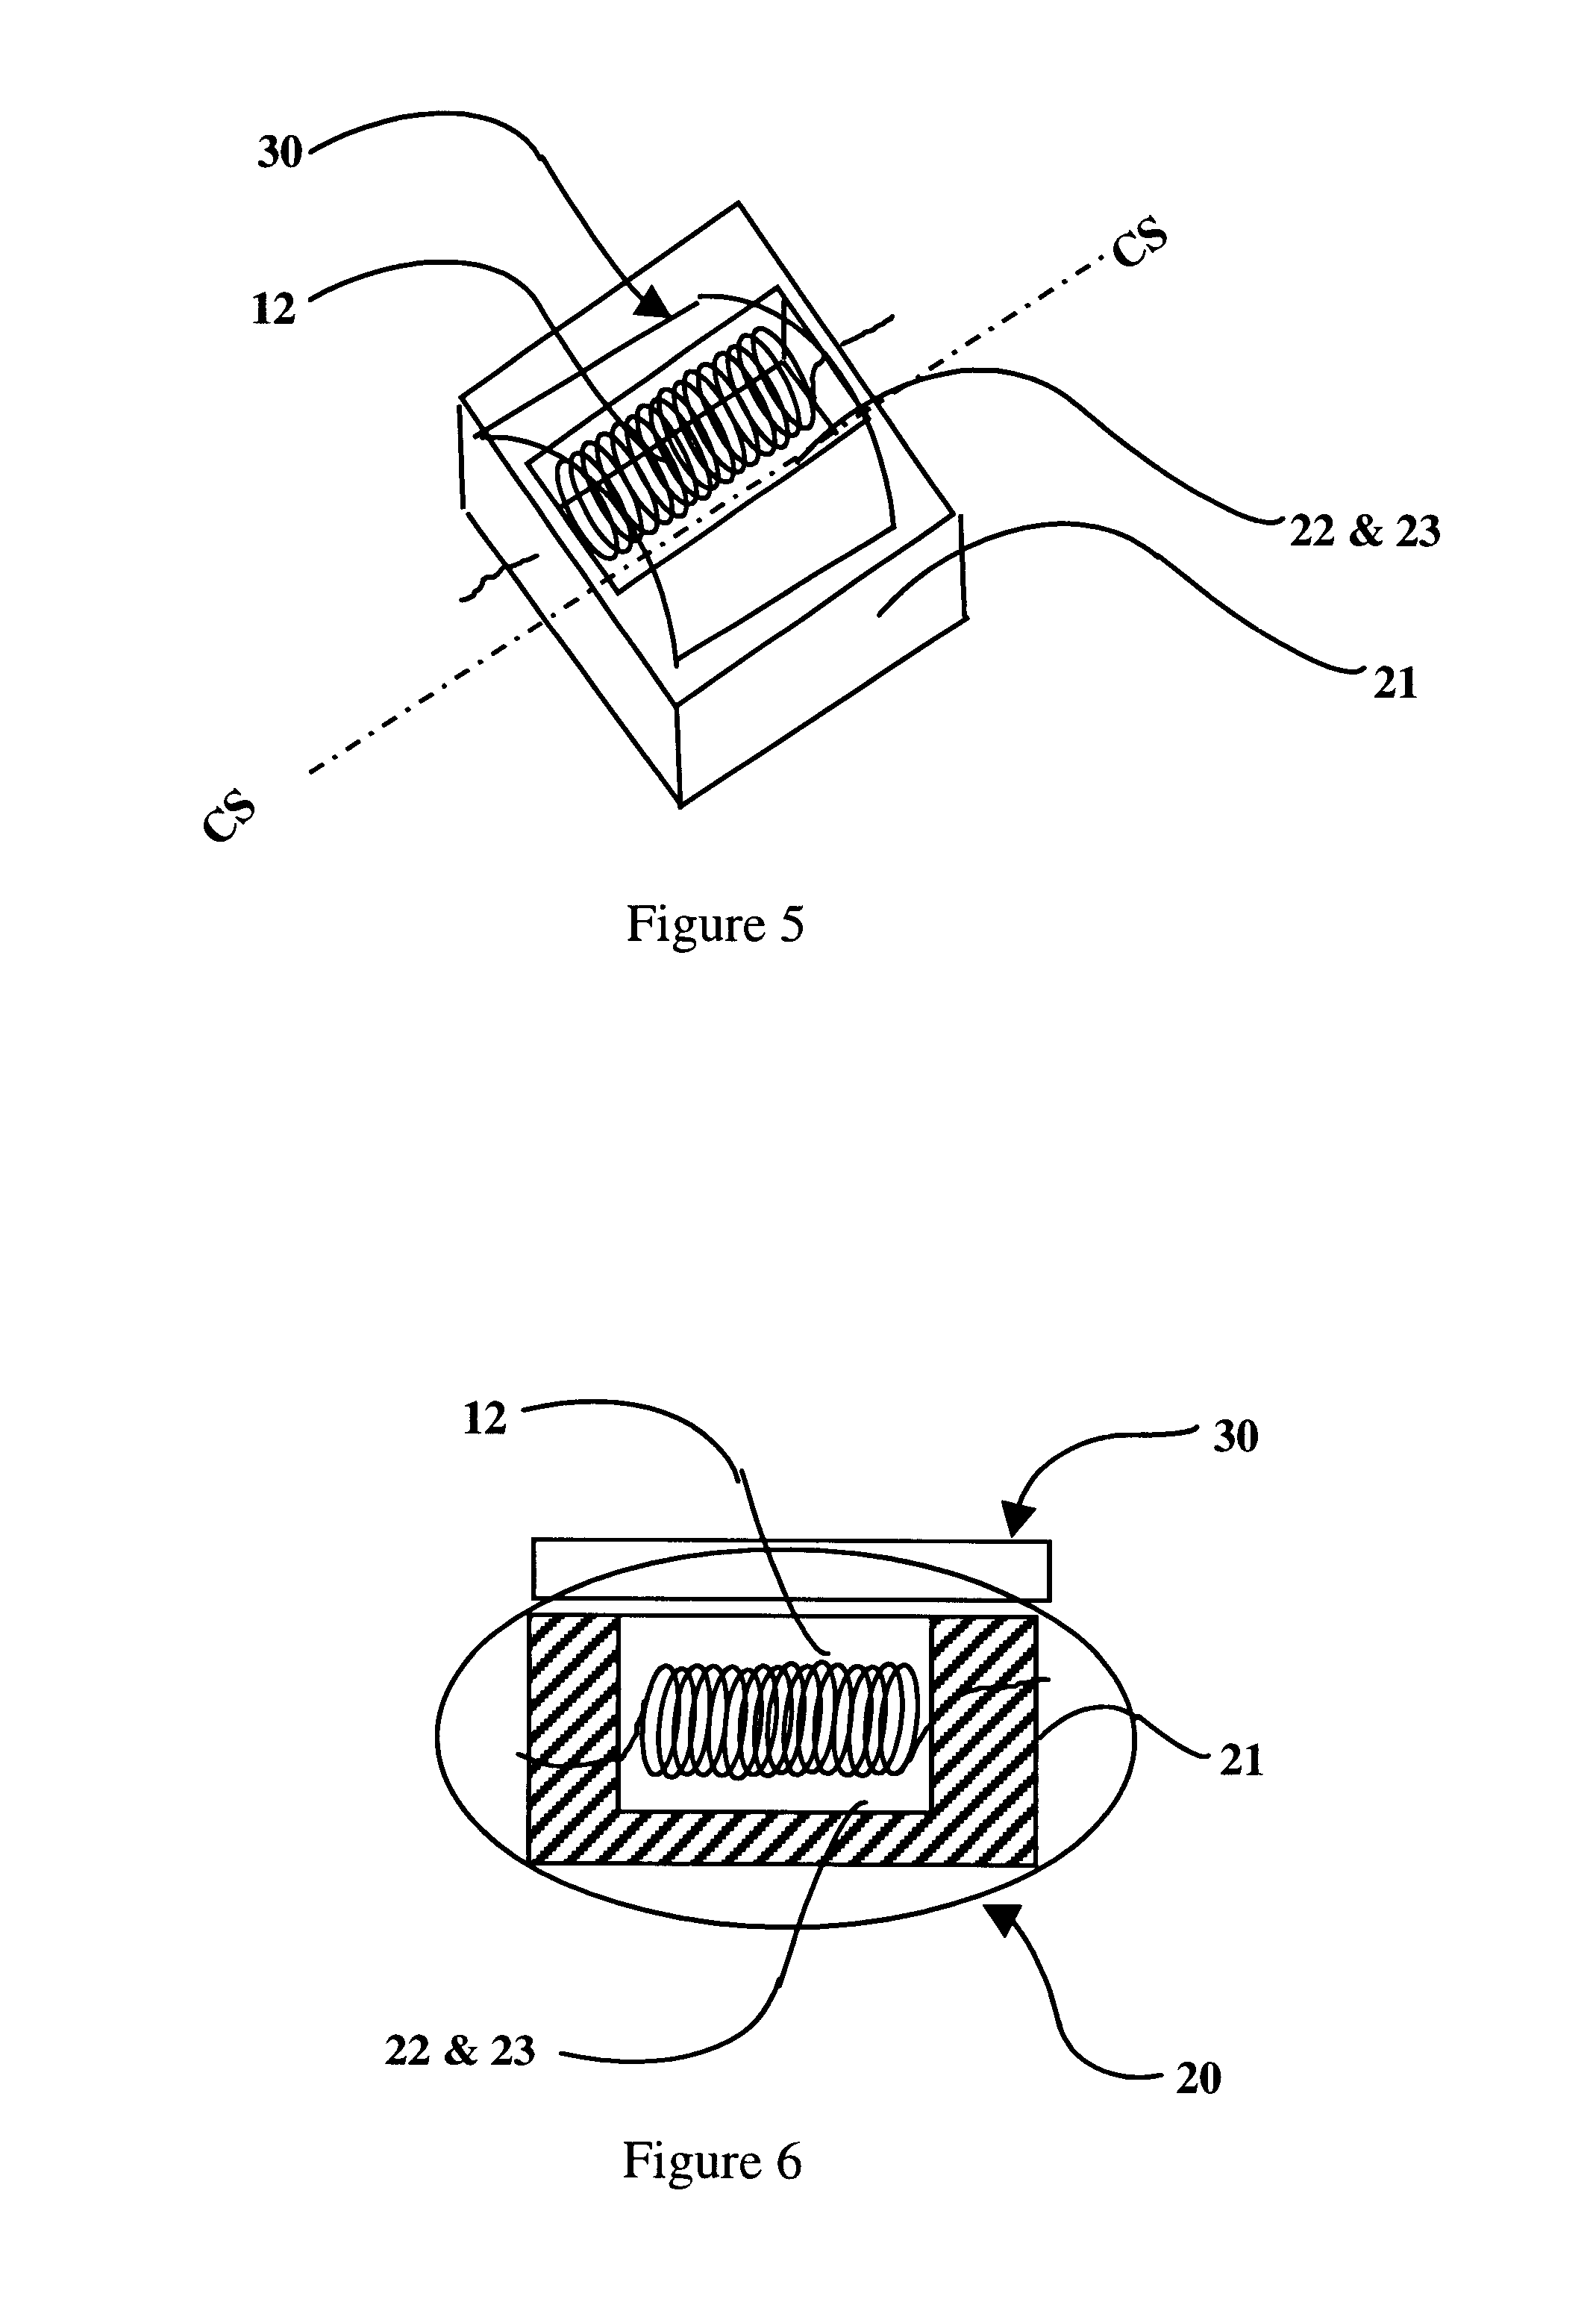 High efficiency light source utilizing co-generating sources